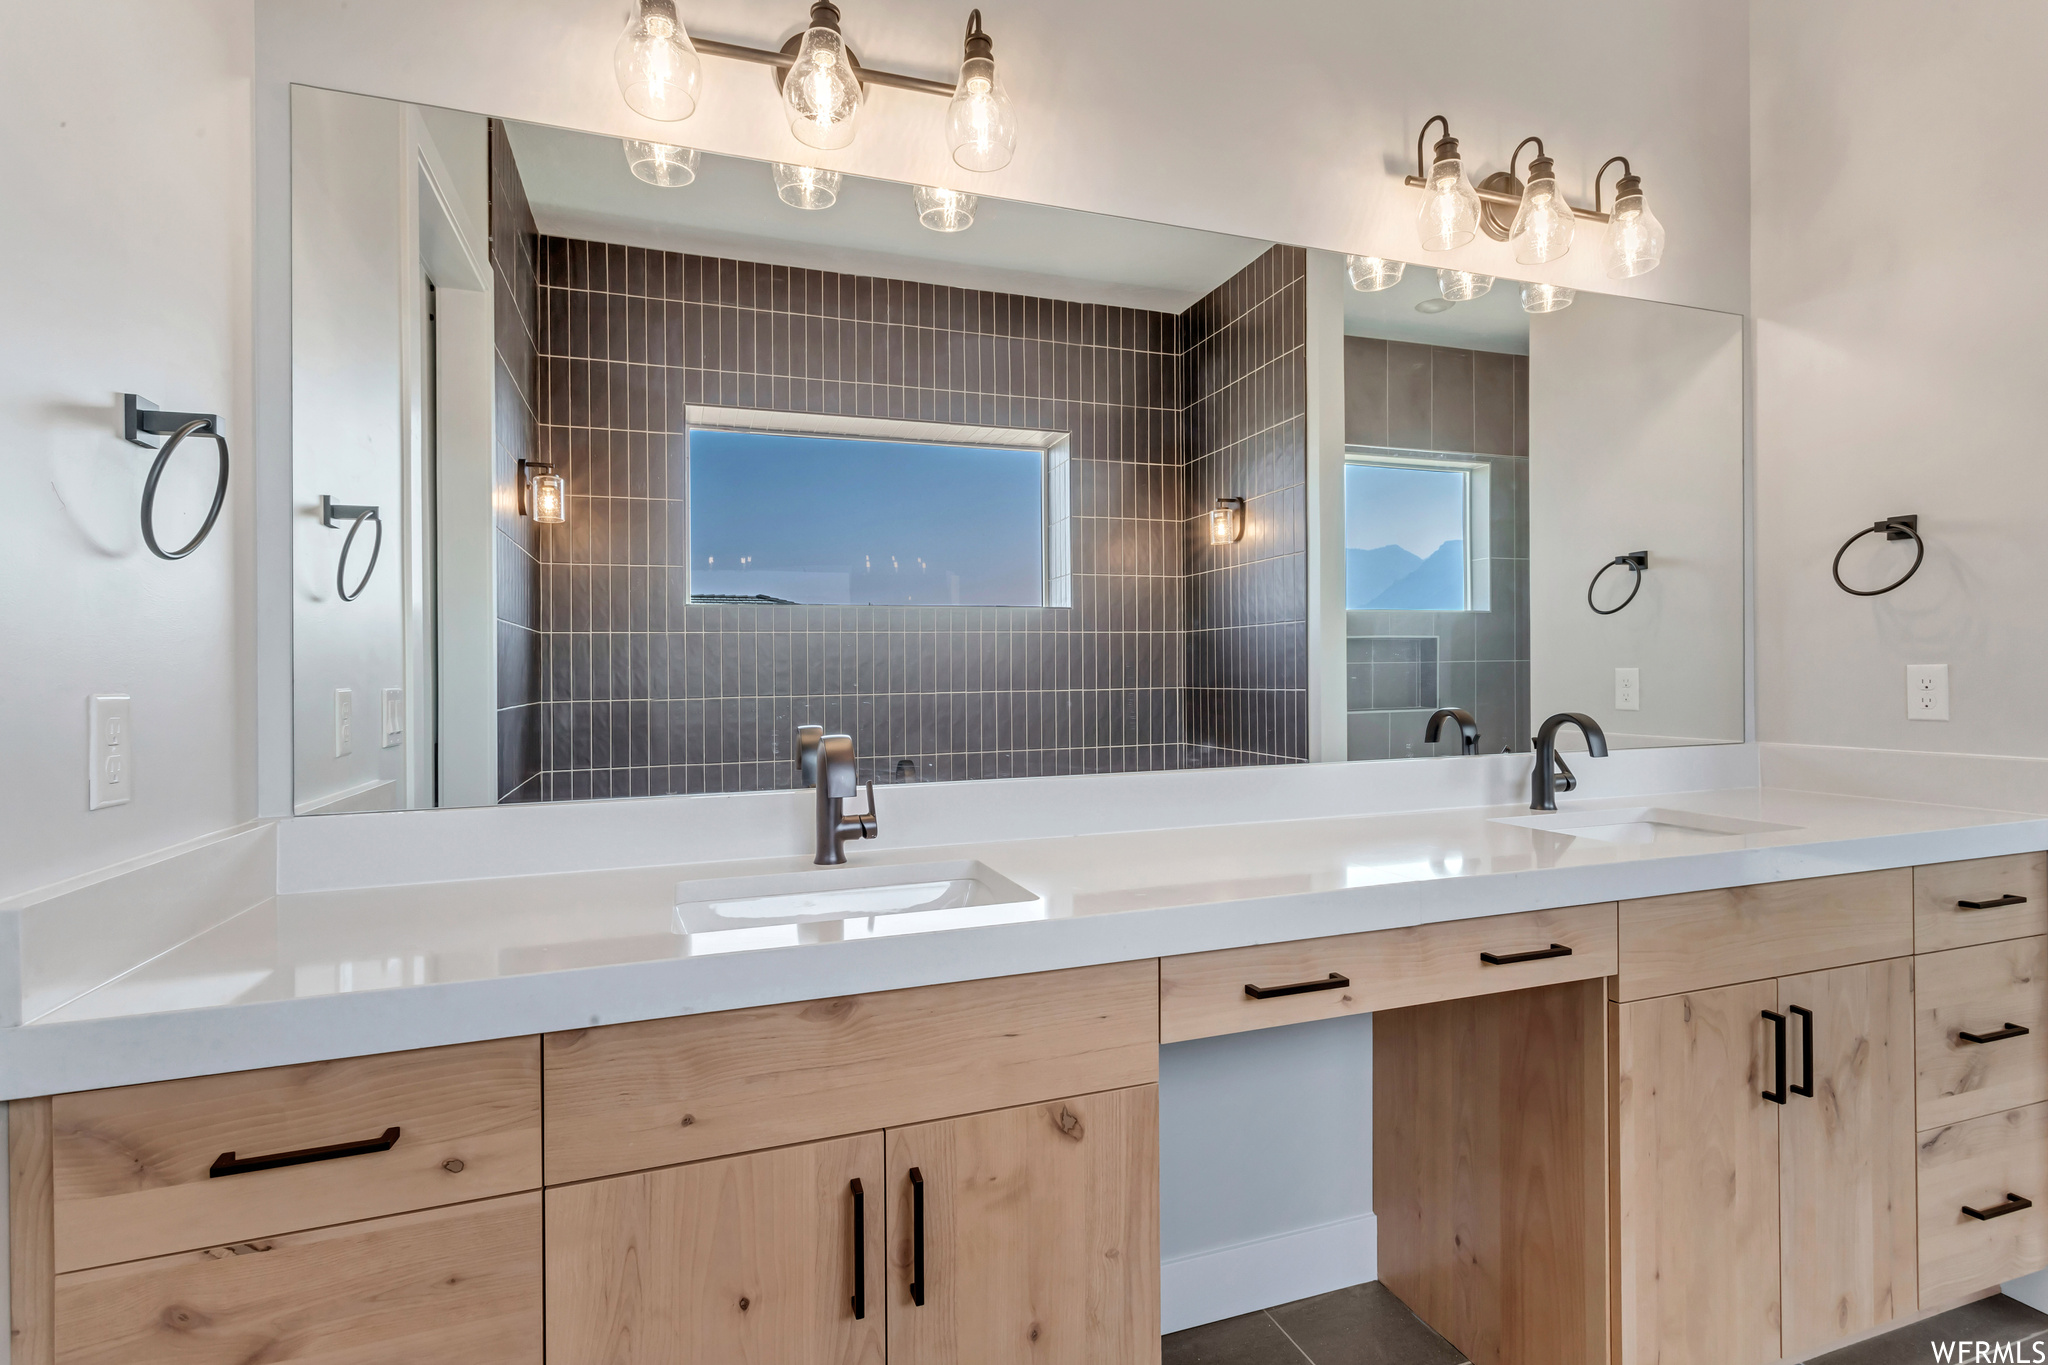 The primary suite bath includes double sinks, a vanity area, soaking tub, large shower and water closet.